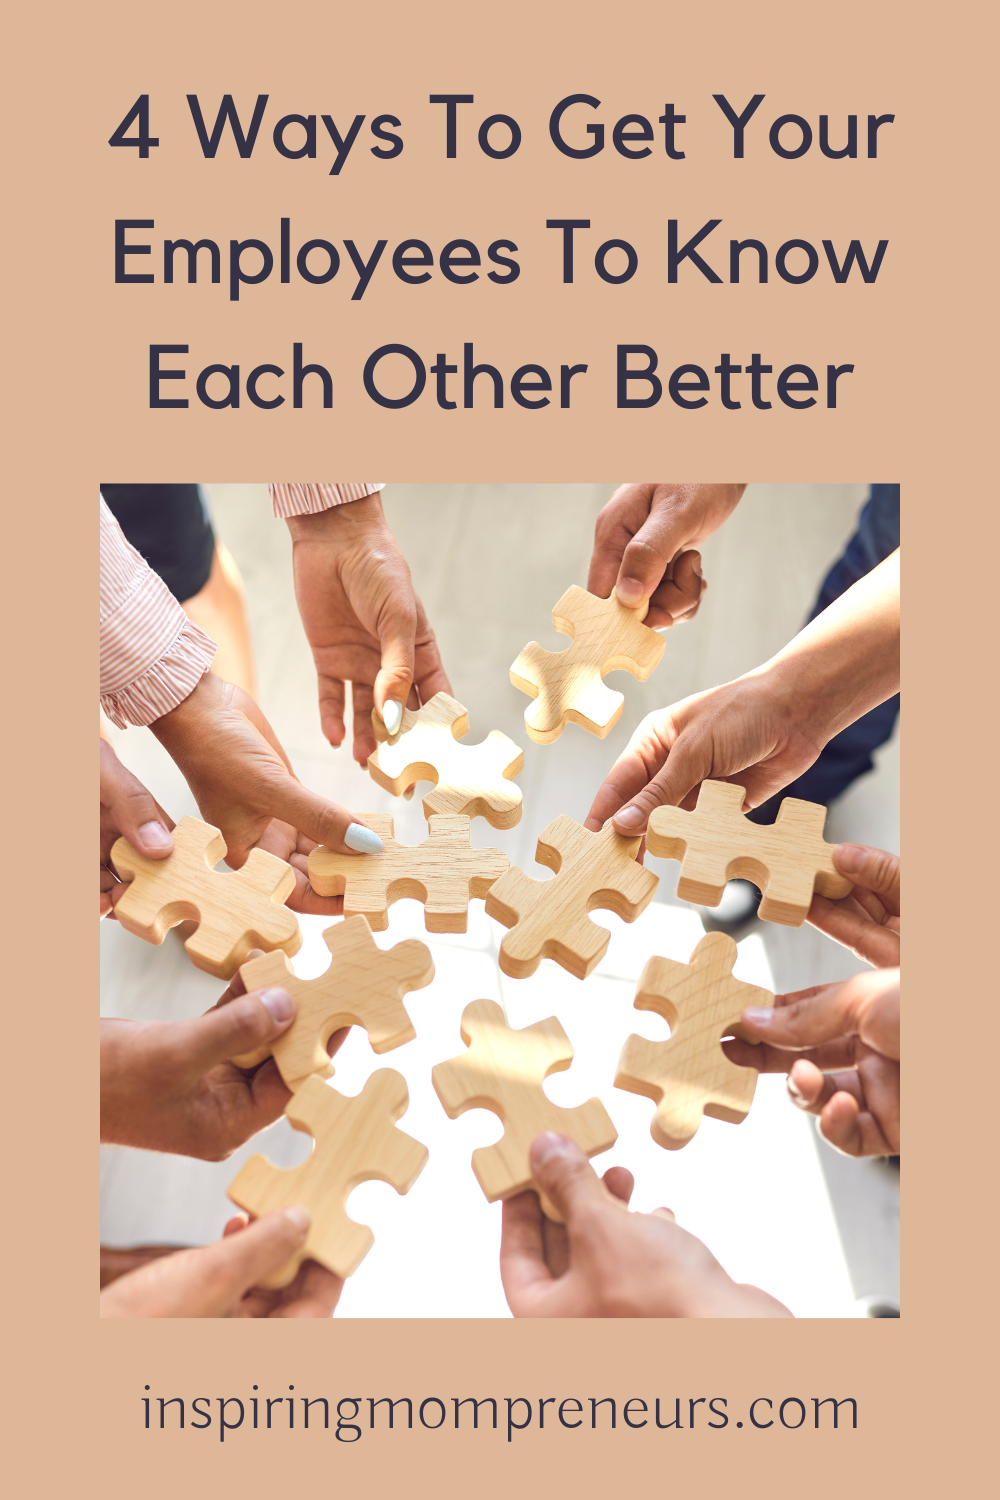 Social interactions at work can boost morale, encourage teamwork, and improve communication. Here are 4 ways to get your employees to know each other better.